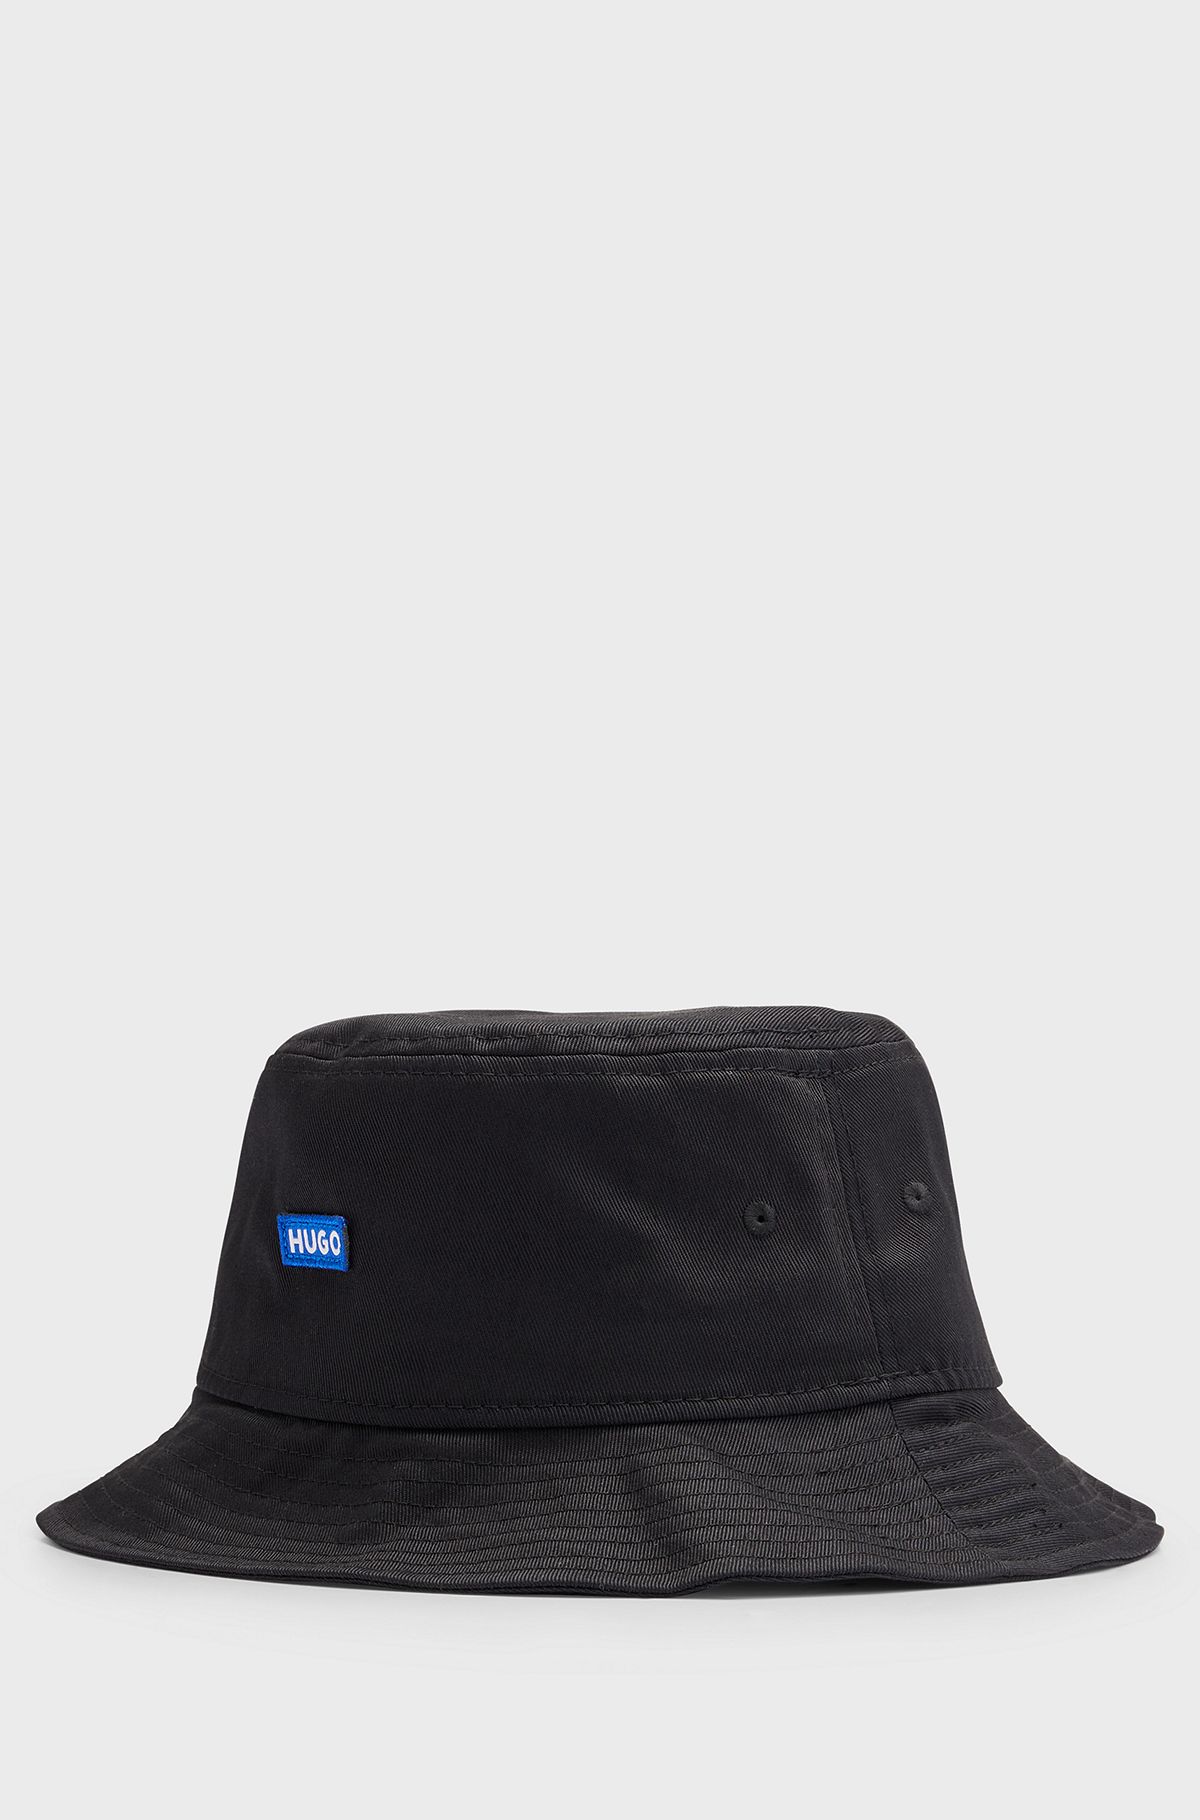 Cotton-twill all-gender bucket hat with logo patch, Black